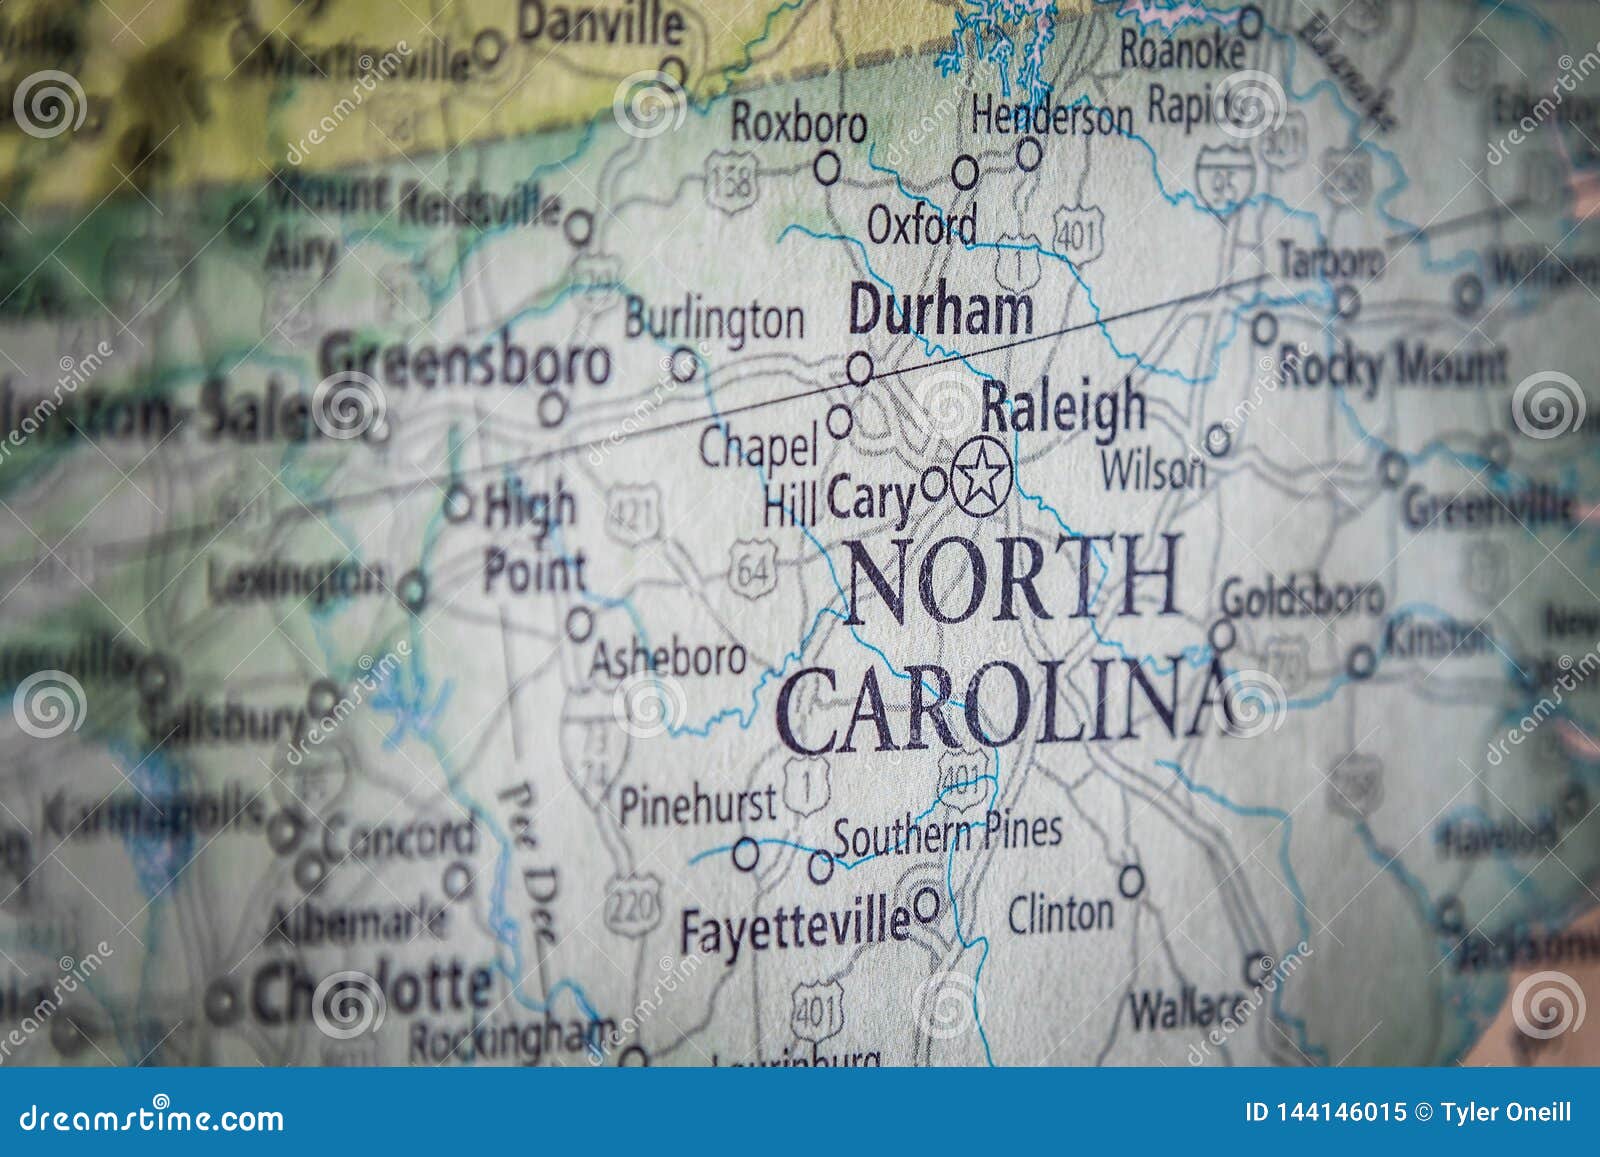 selective focus of north carolina state on a geographical and political state map of the usa